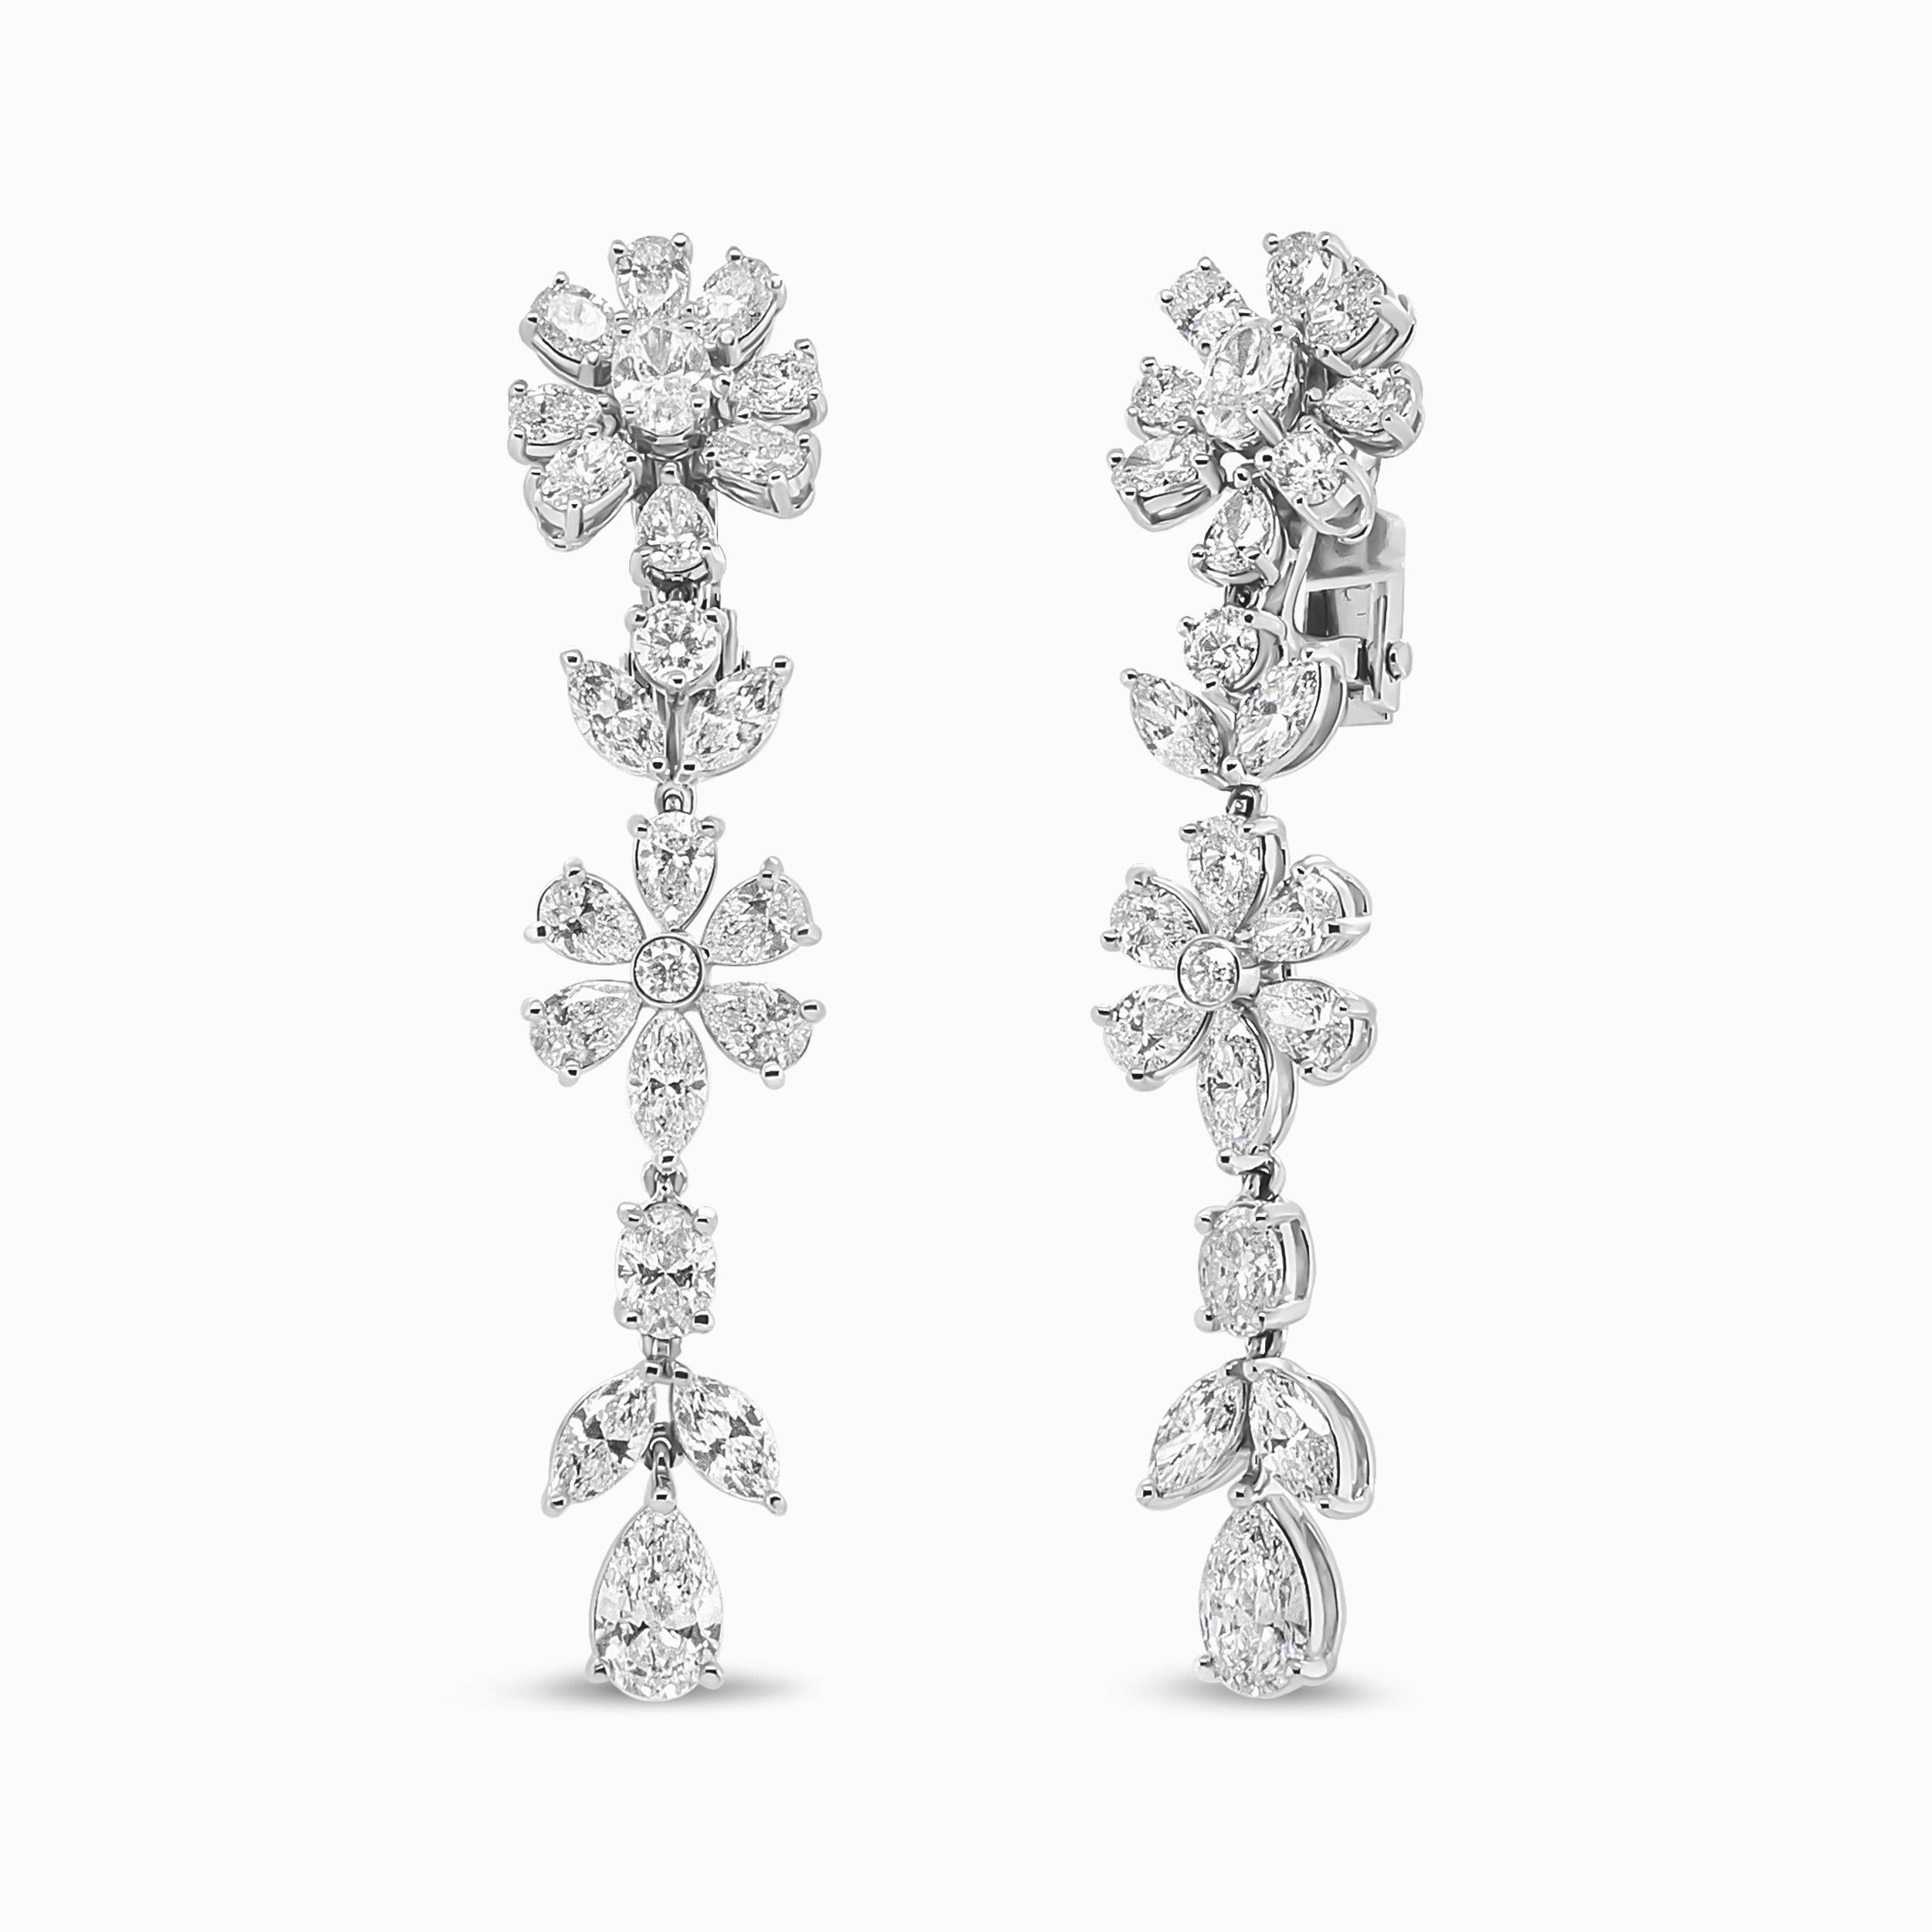 A perfect complement to any look, this richly presented pair of diamond flower earrings is a fresh and stylish approach to accessorizing. This intricate flower motif bestows elegance and sophistication to its wearer, exemplifying excellence in with